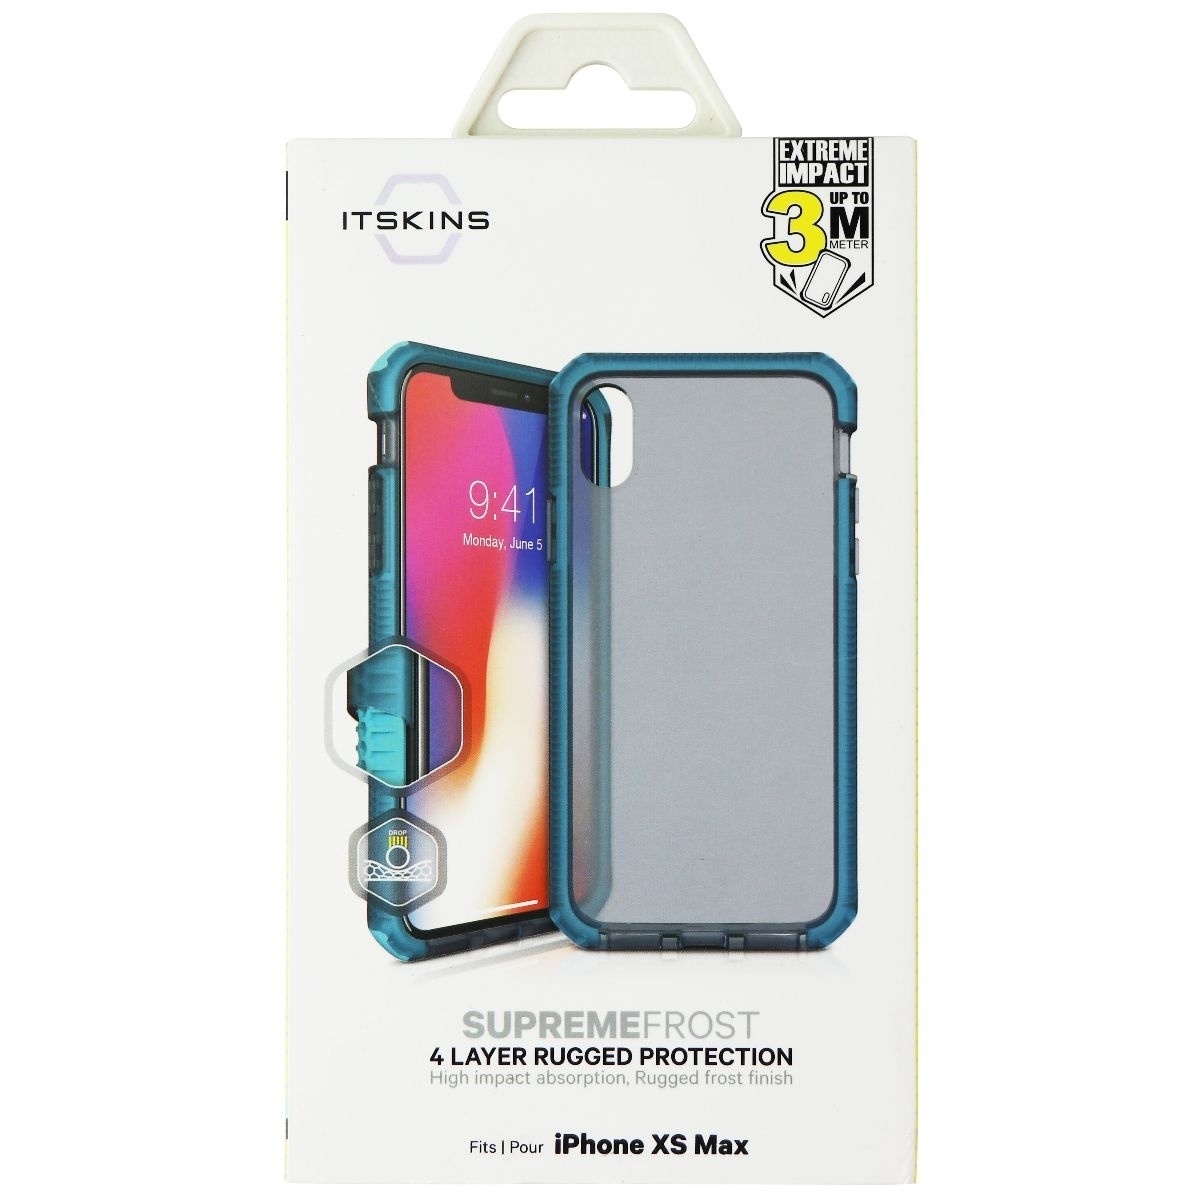 ITSKINS Supreme Frost Case For Apple IPhone Xs Max - Centurion Blue And Black